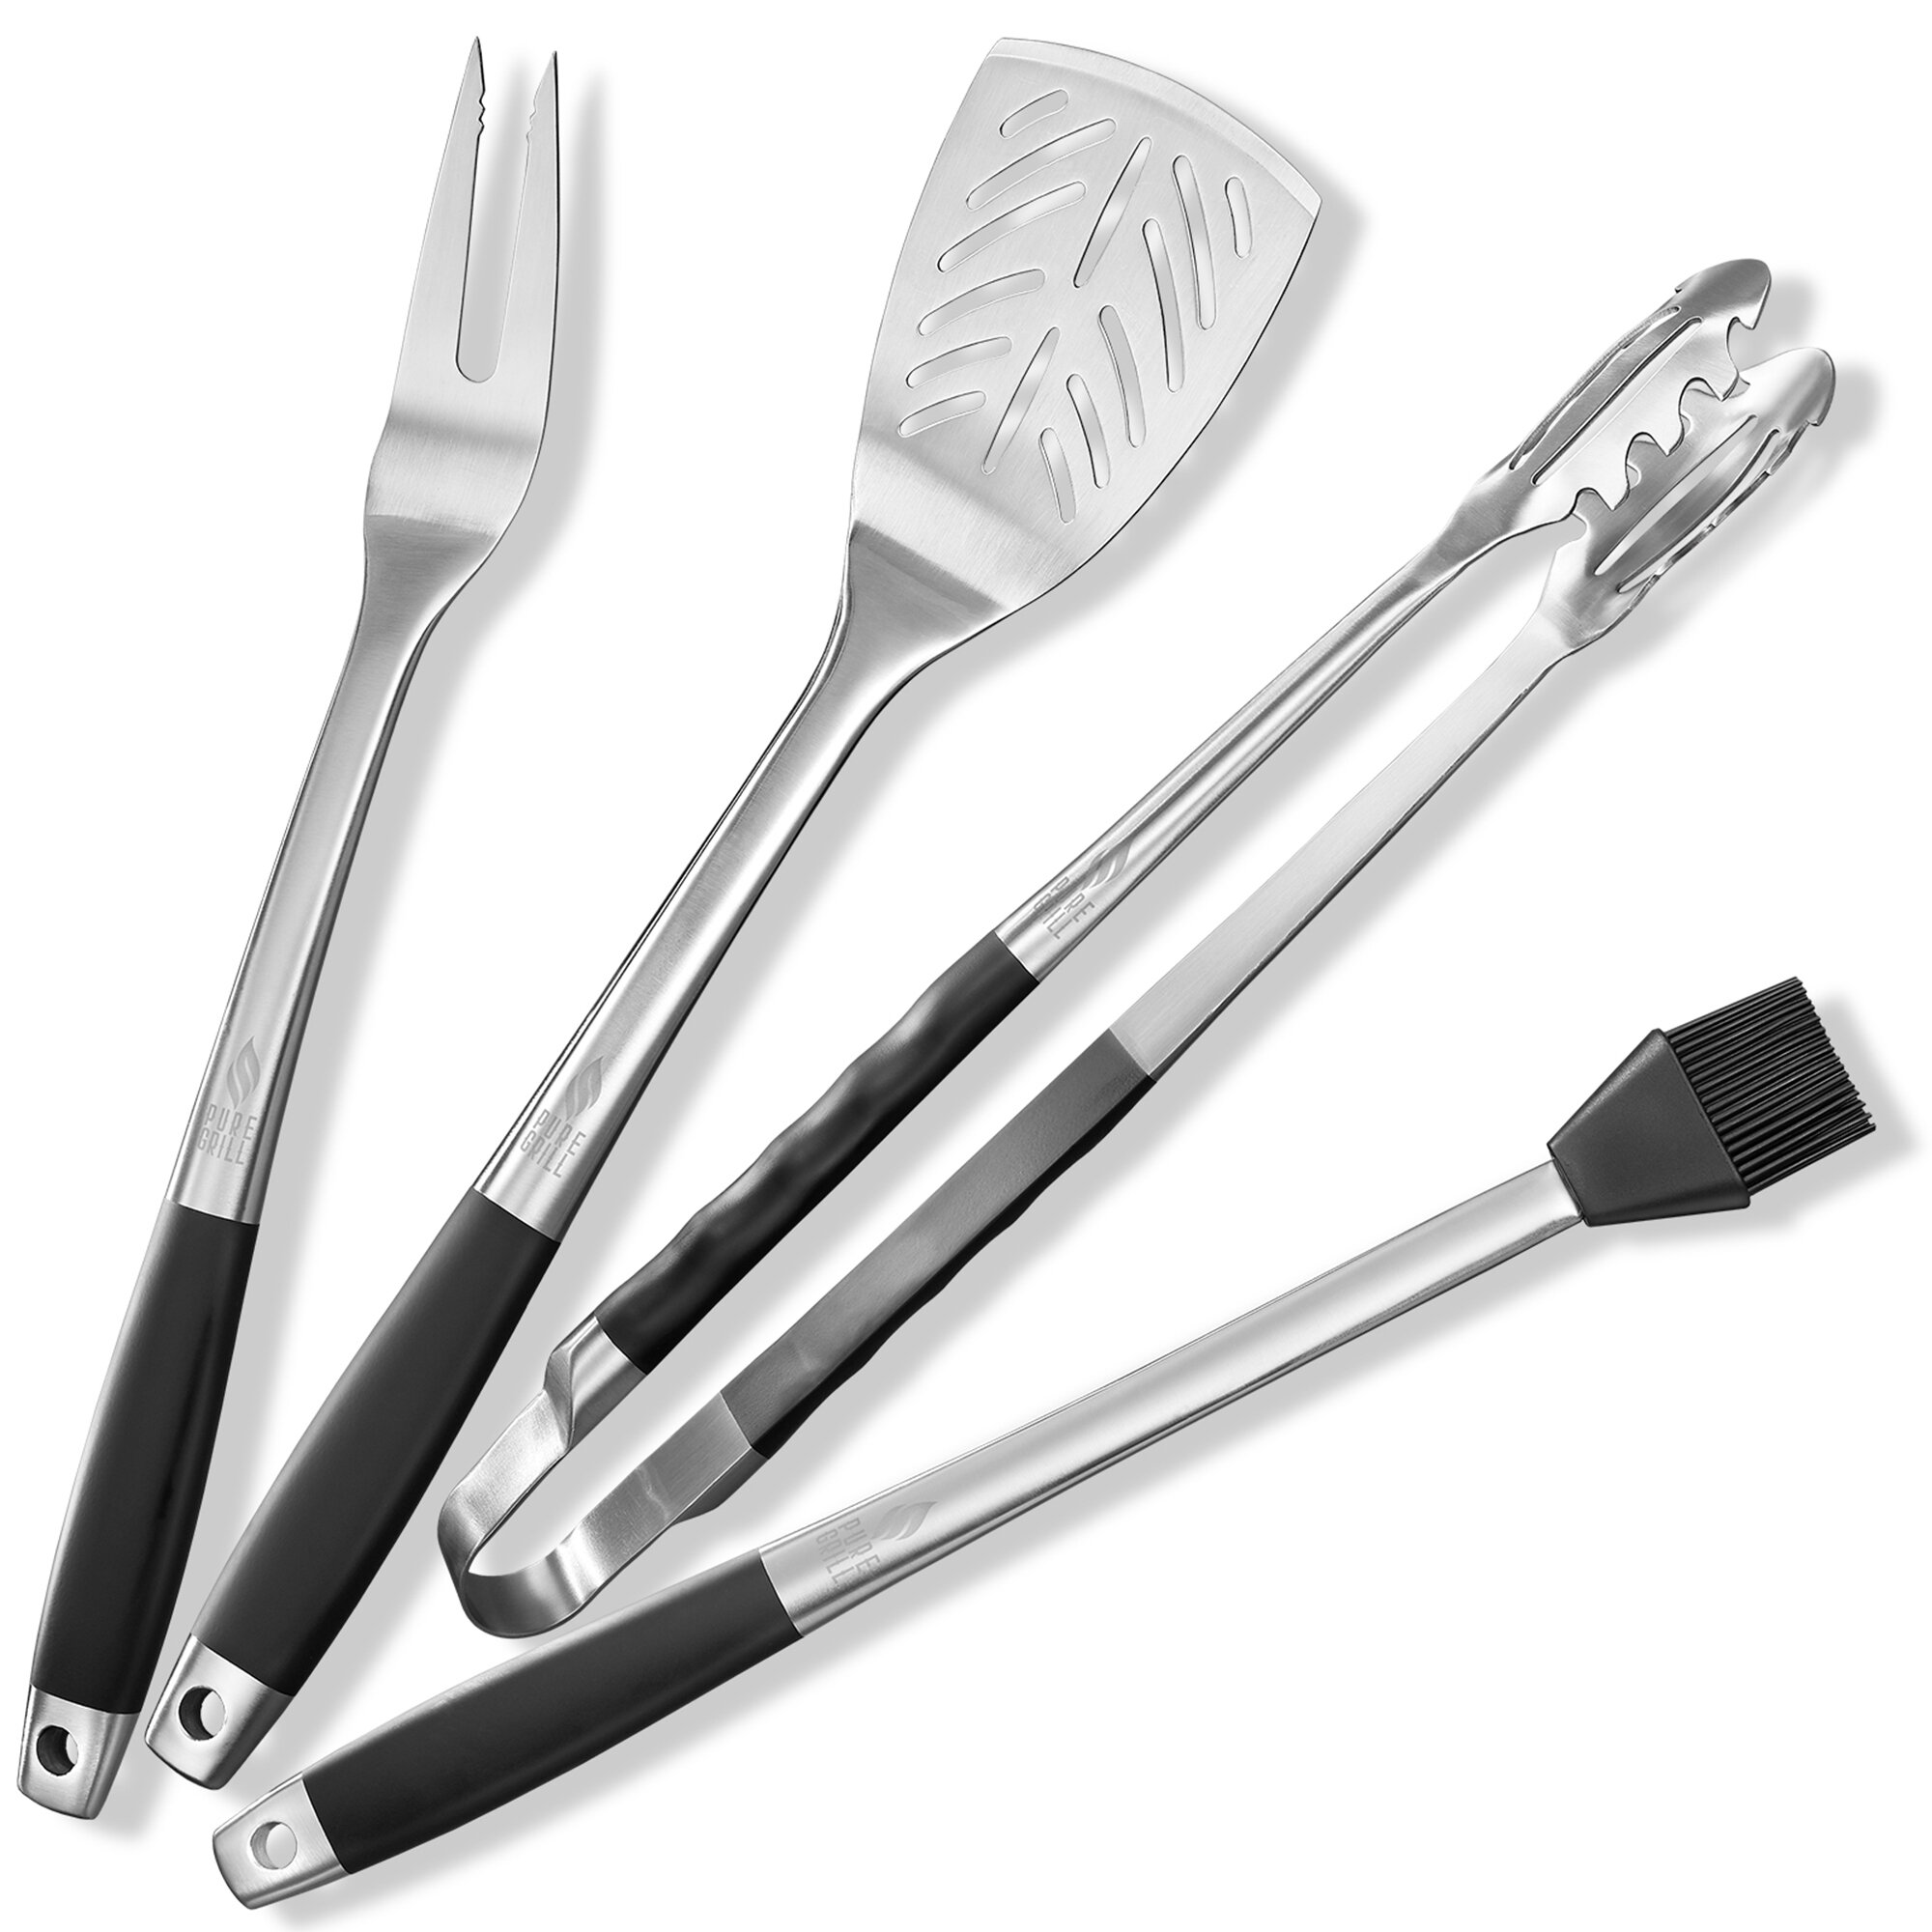 Premium Grilling Gift Set with Spatula, Tongs & BBQ Fork